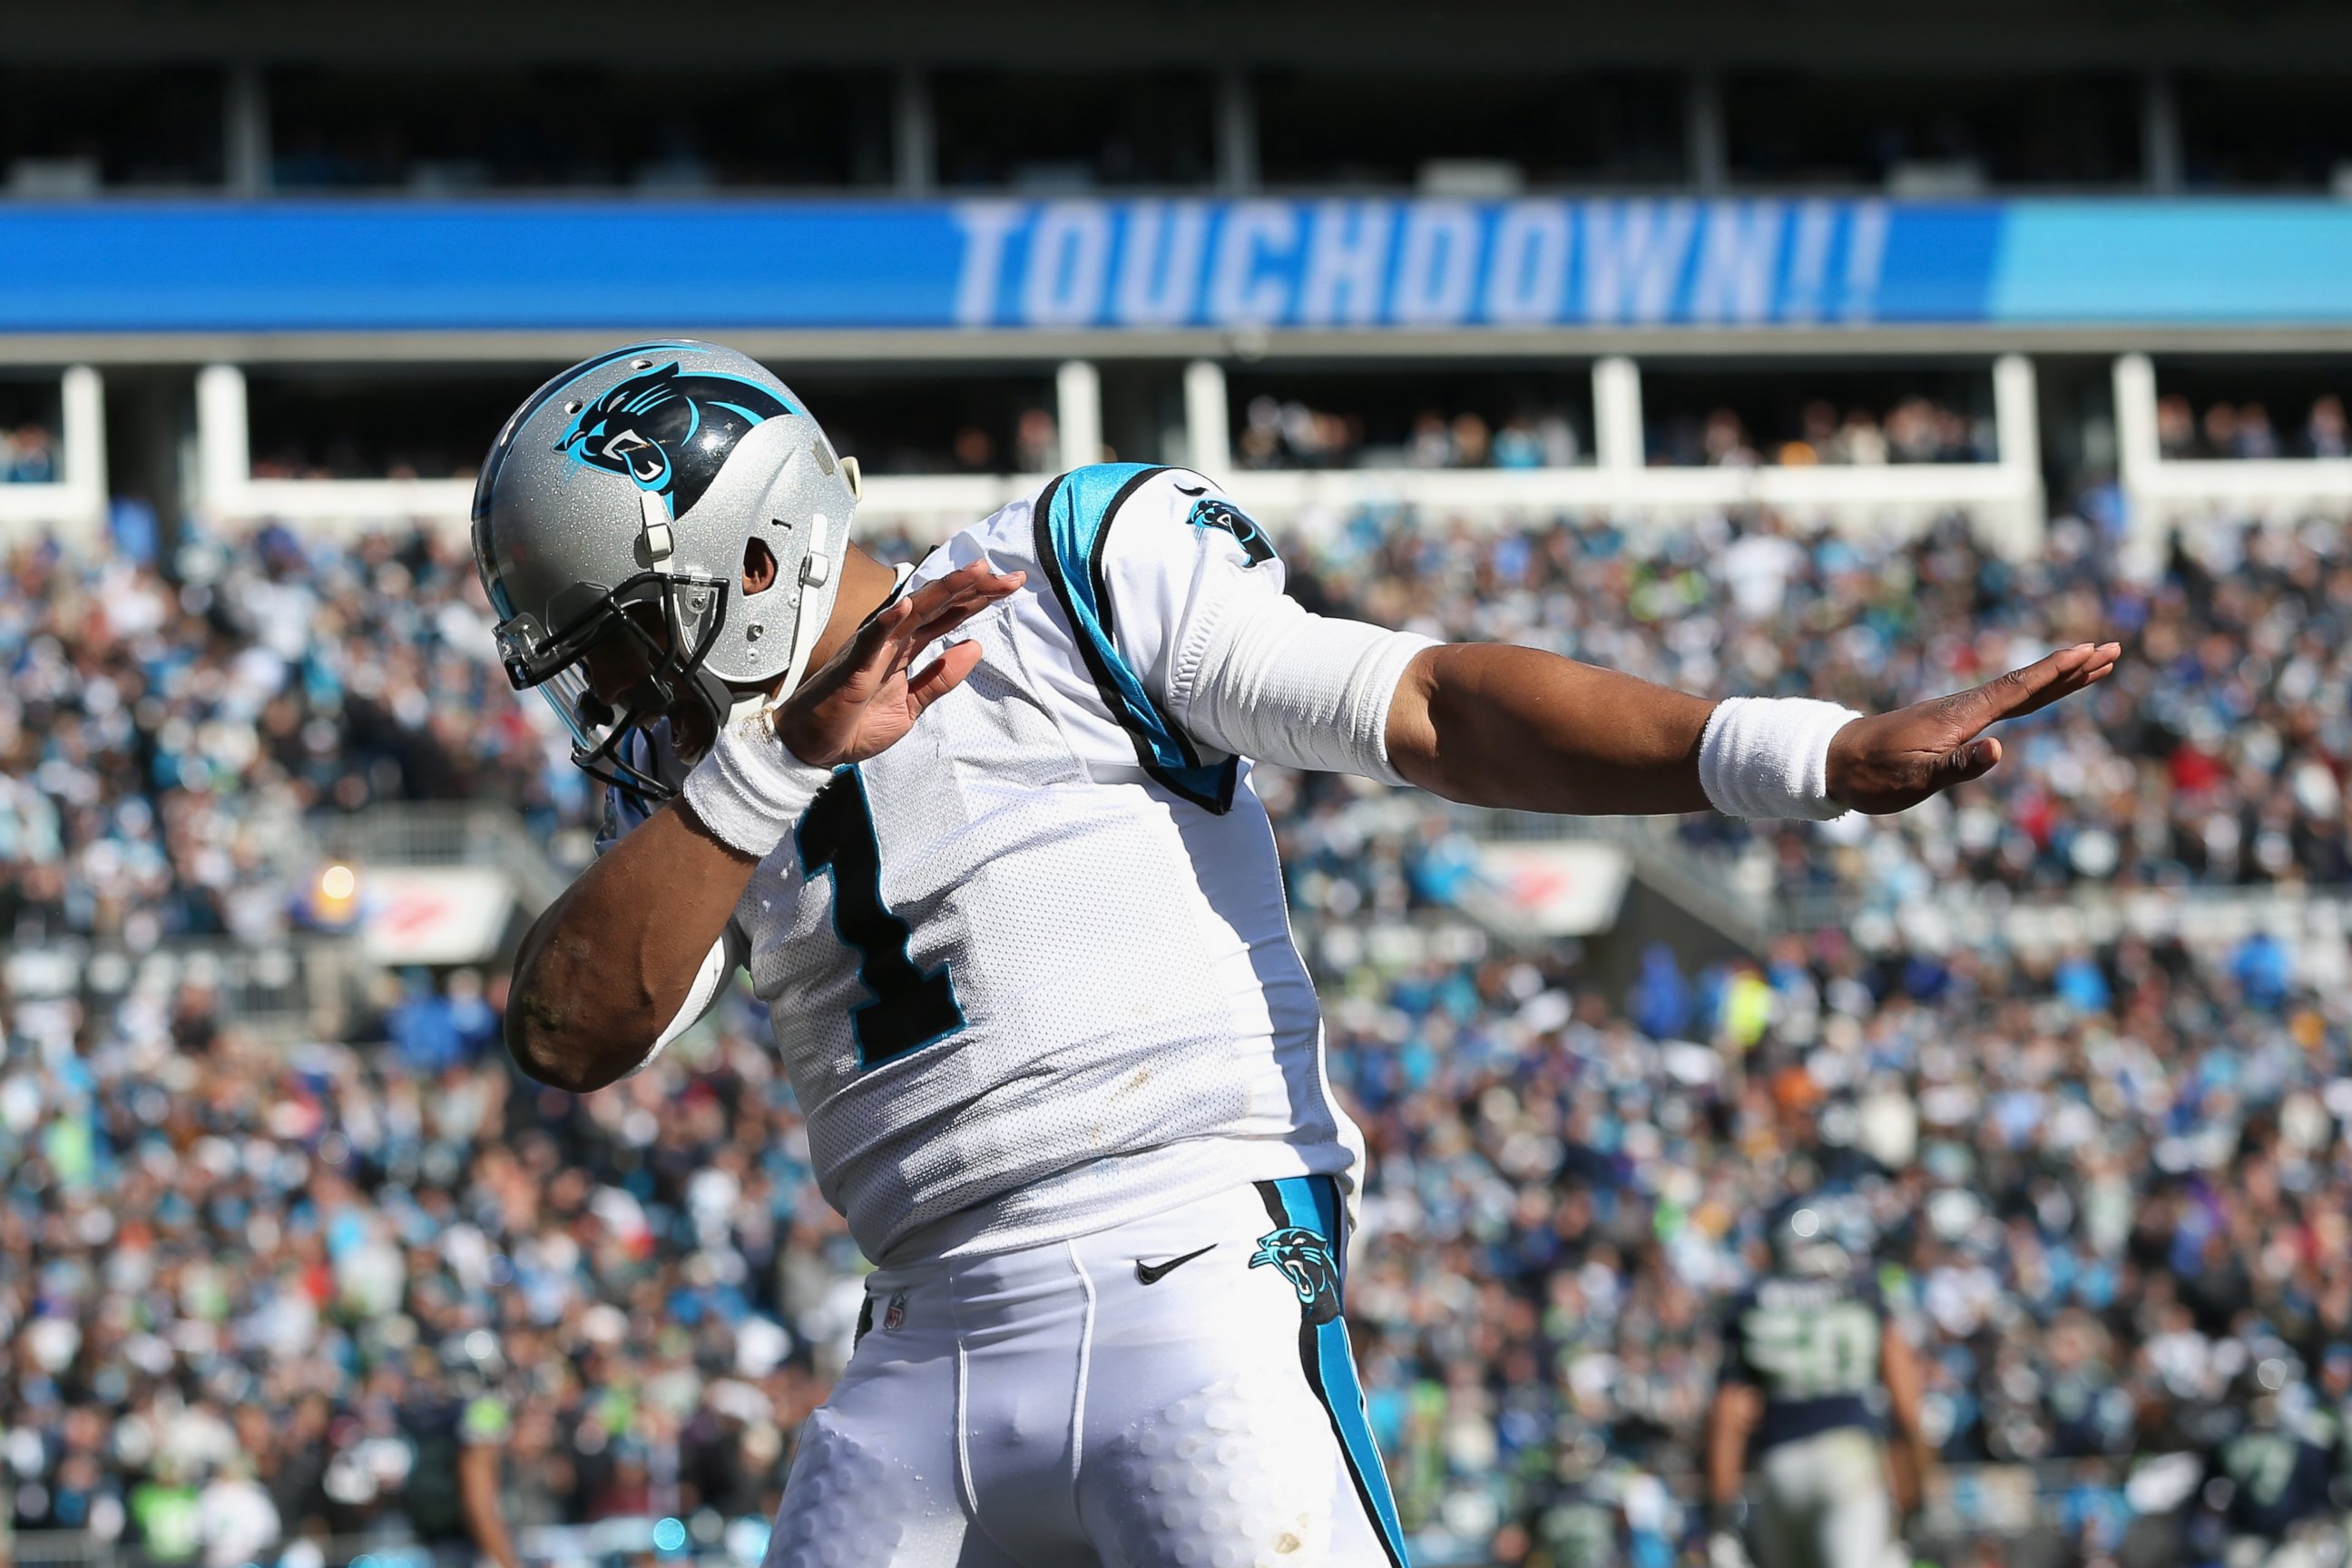 PHOTO: Cam Newton of the Carolina Panthers celebrates after a touchdown during the second quarter of the NFC Divisional Playoff Game against the Seattle Seahawks at Bank of America Stadium on Jan. 17, 2016 in Charlotte, N.C.